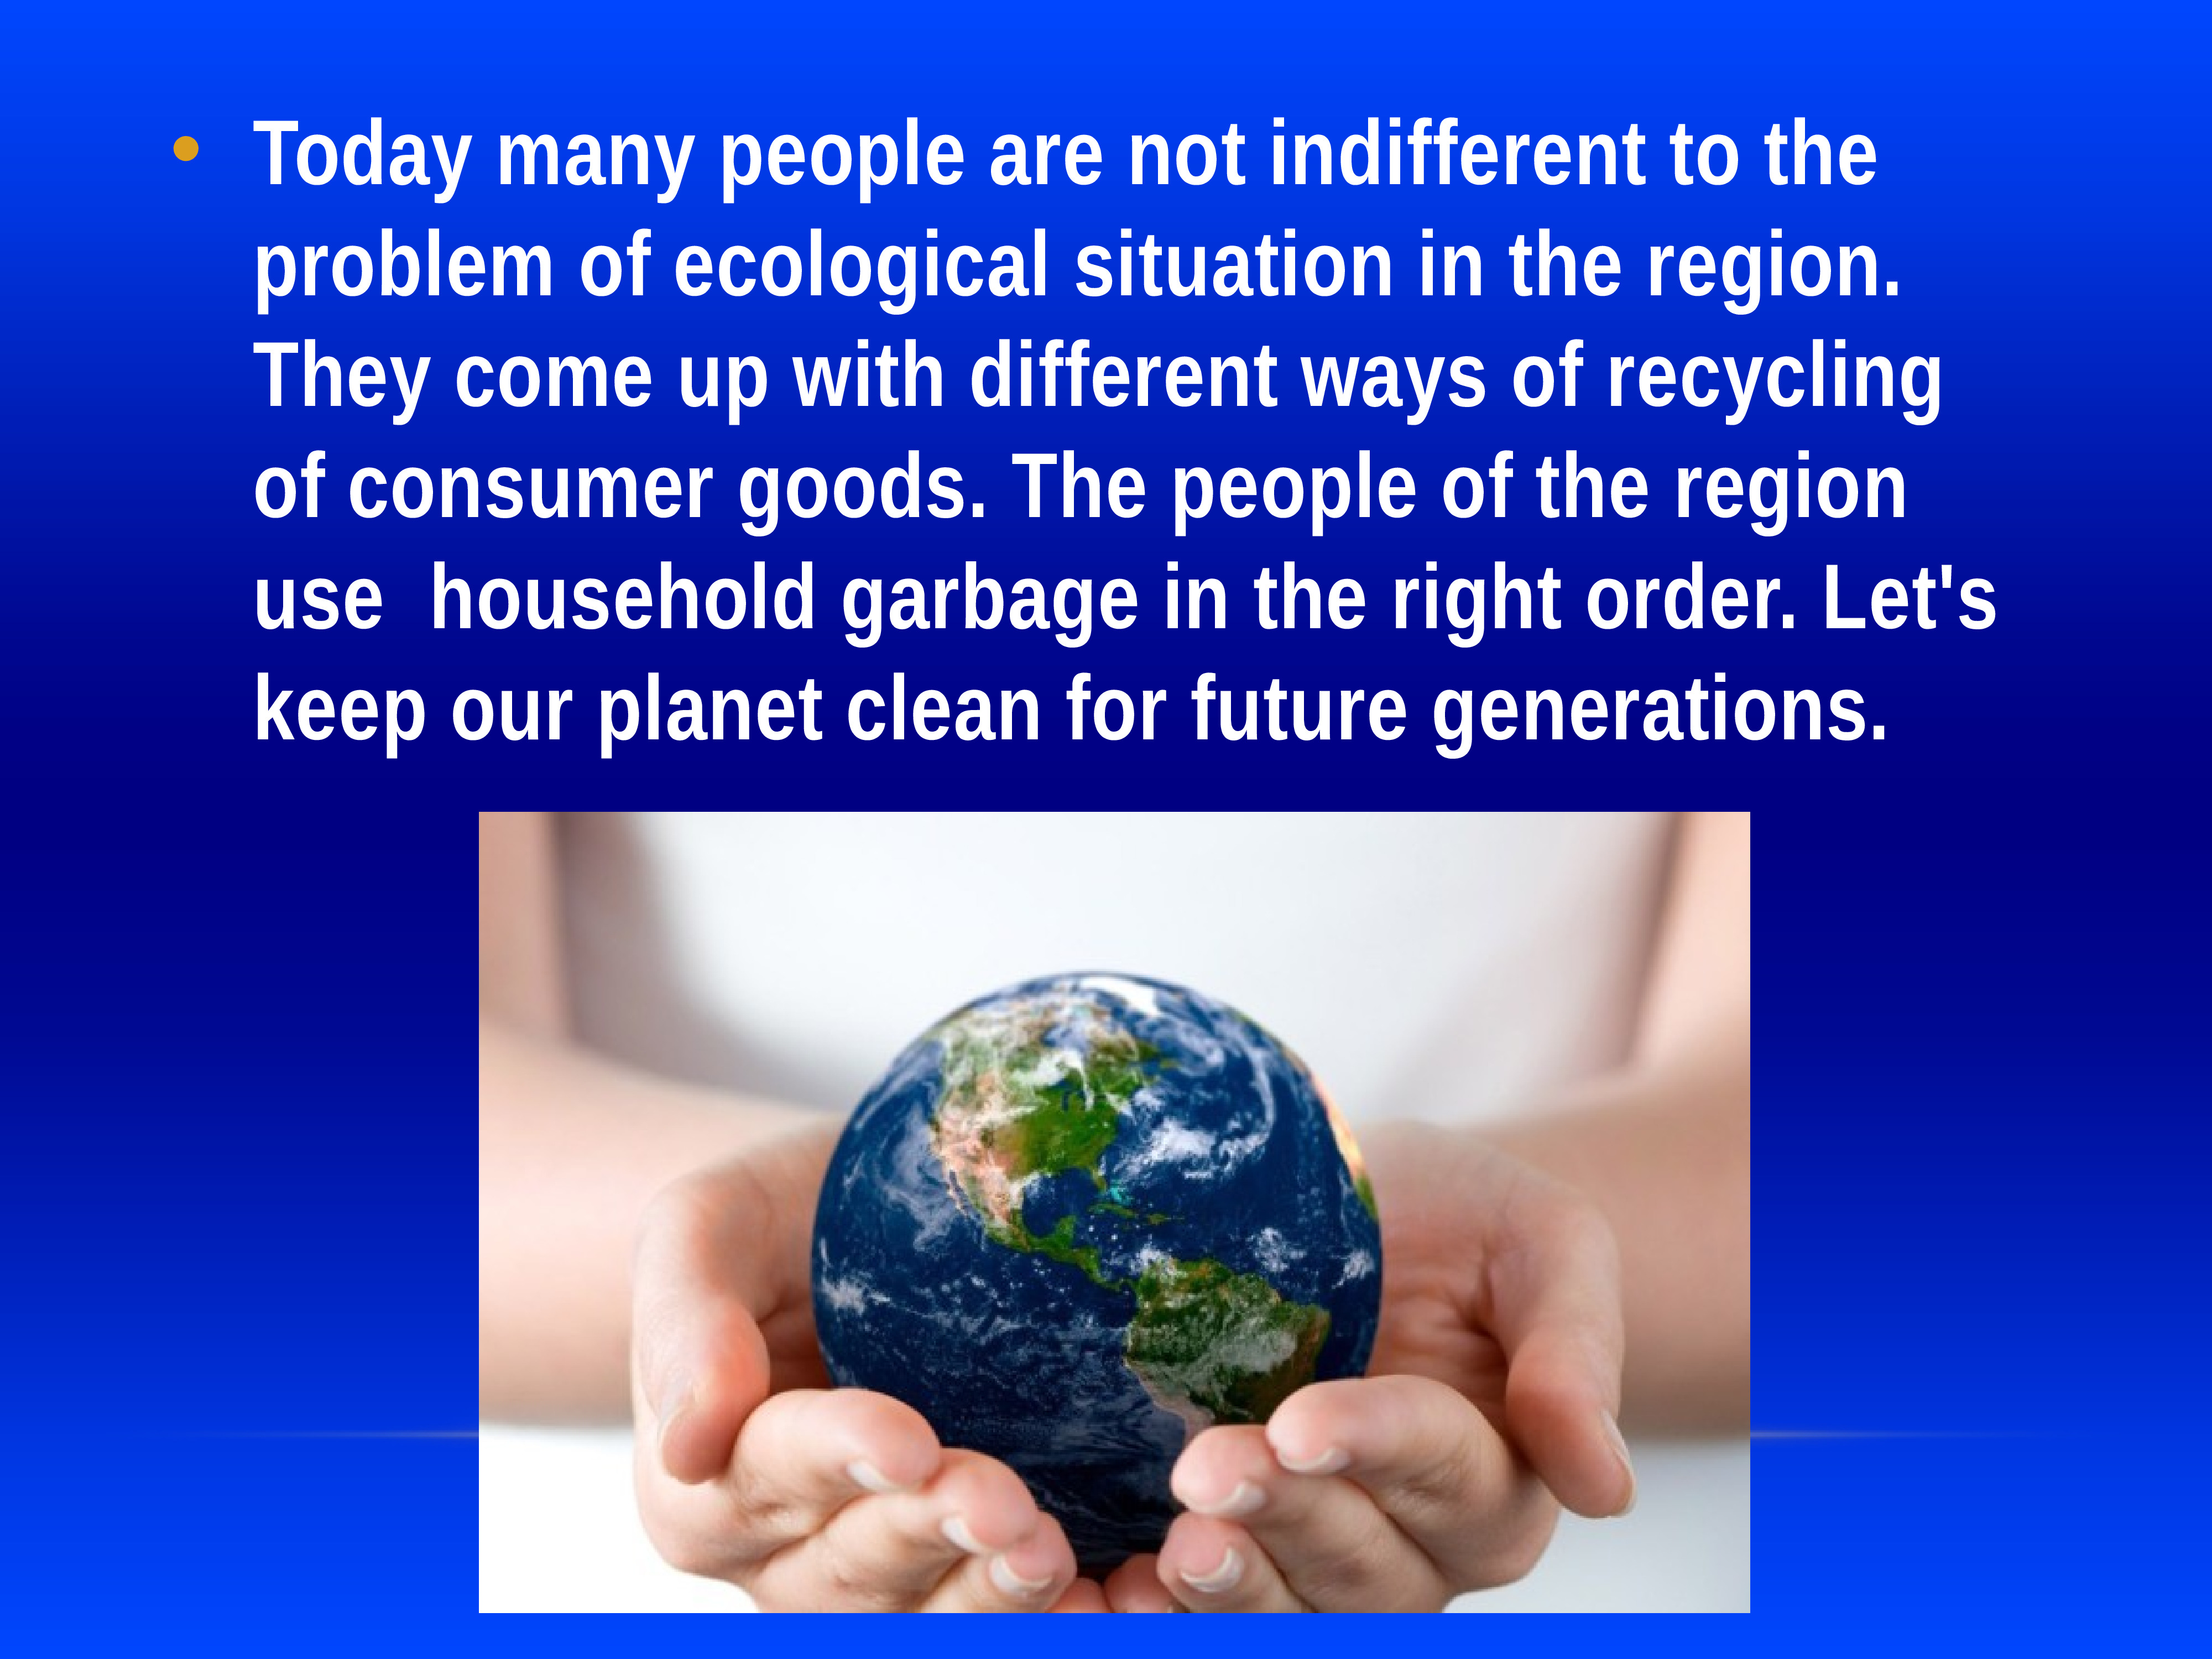 Improve the ecological situation